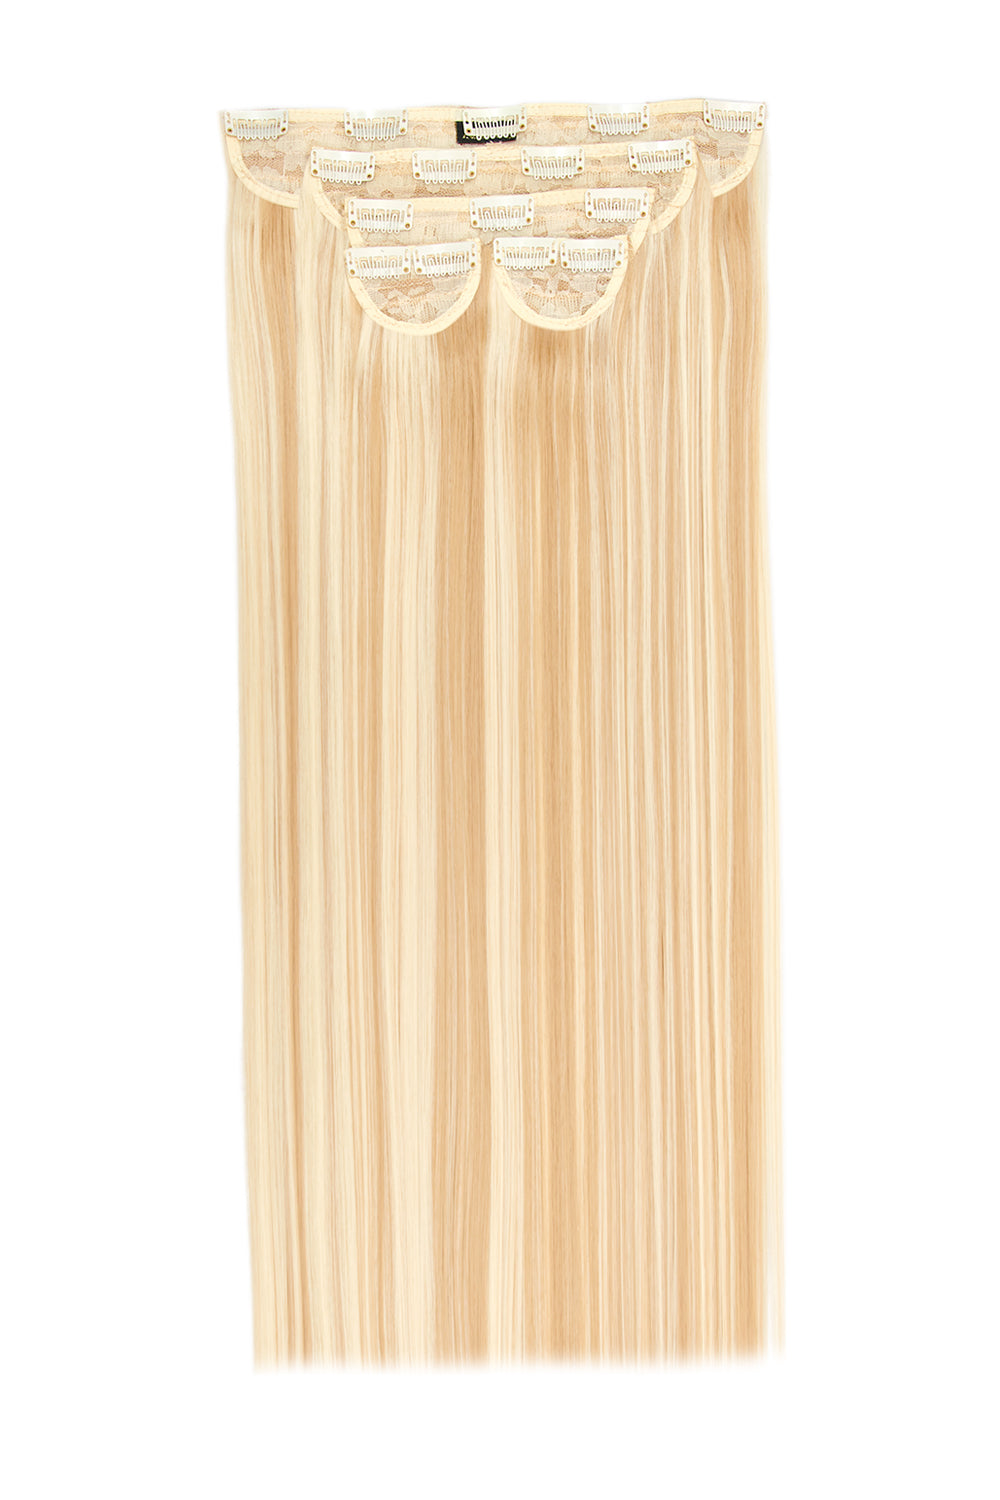 Super Thick 22" 5 Piece Straight Clip In Hair Extensions - LullaBellz - Highlighted Champagne